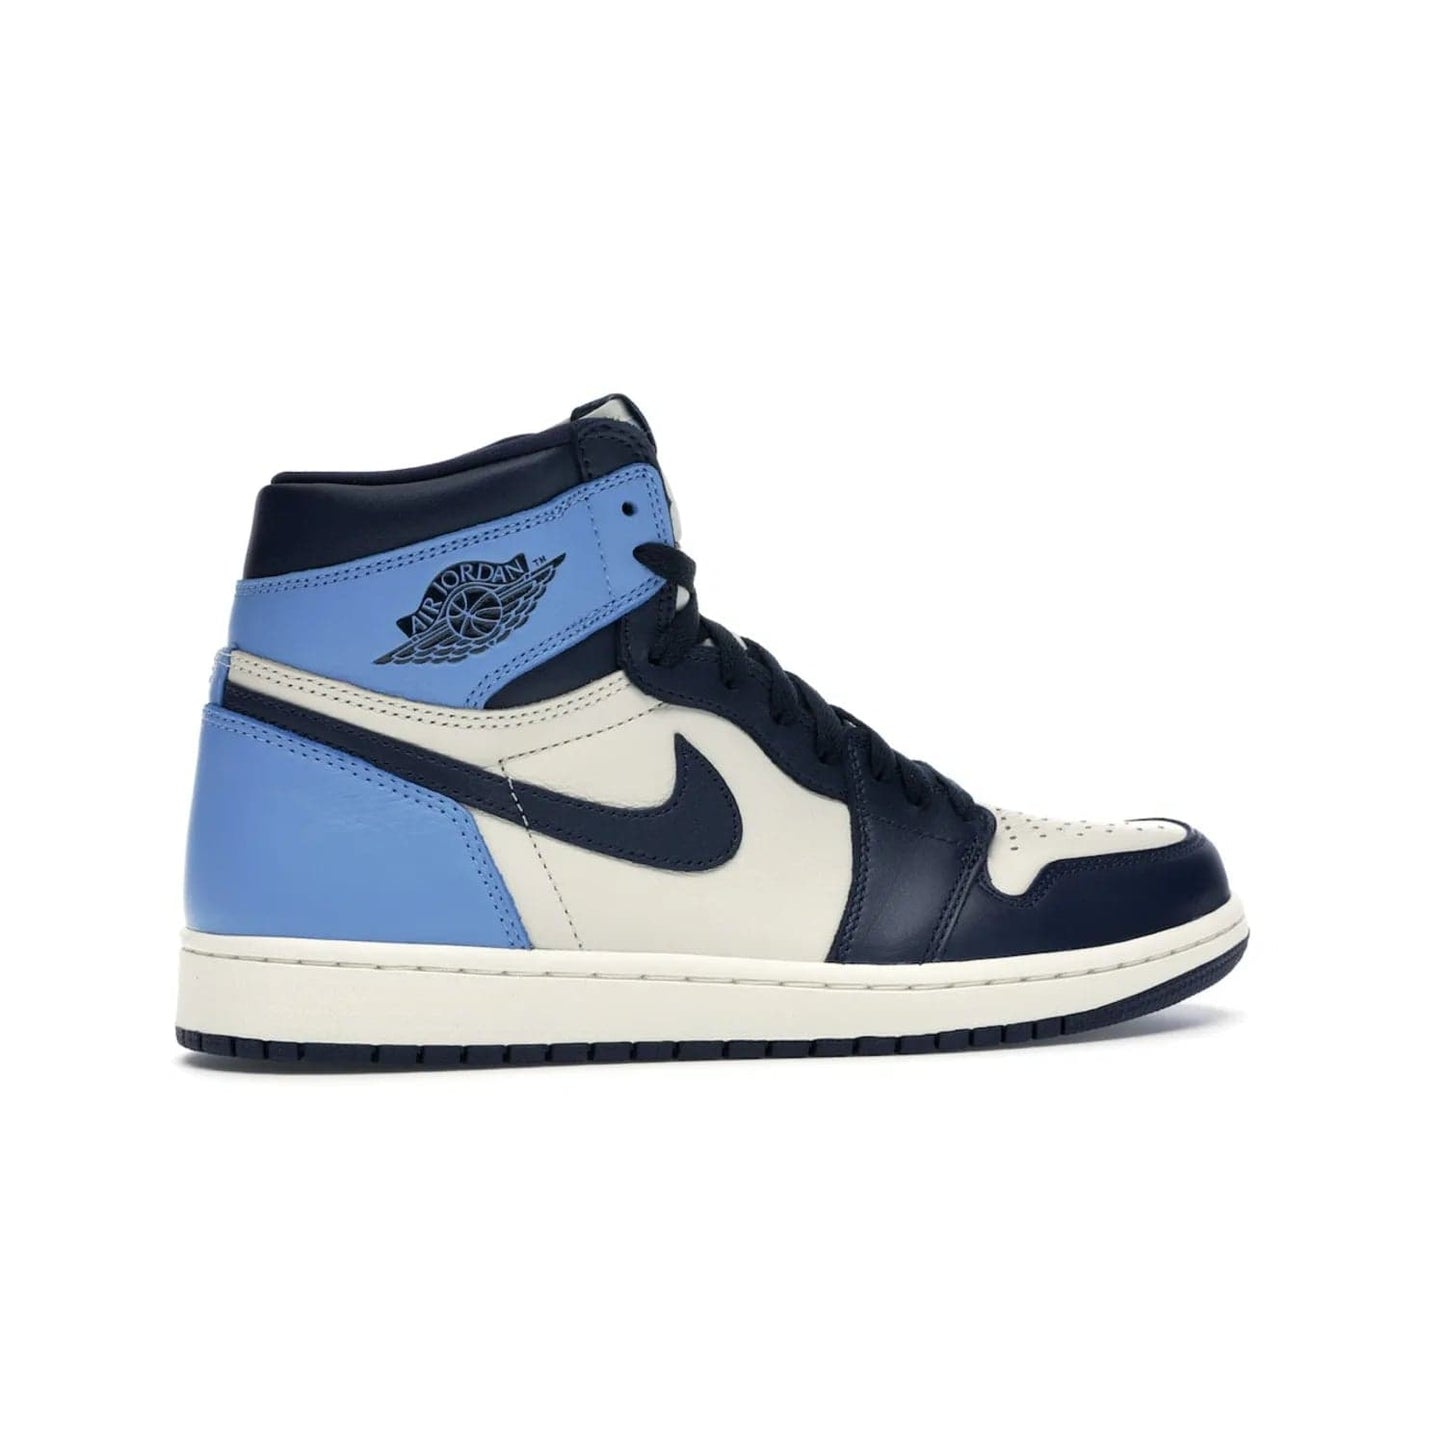 Jordan 1 Retro High Obsidian UNC - Image 35 - Only at www.BallersClubKickz.com - Bring a timeless classic to your wardrobe with the Air Jordan 1 Retro High "Obsidian/University Blue”. A full leather upper combines Obsidian and University Blue detailing for a retro Jordan style. Stitched Jumpman logo pays tribute to UNC. Experience classic style with a timeless sneaker.